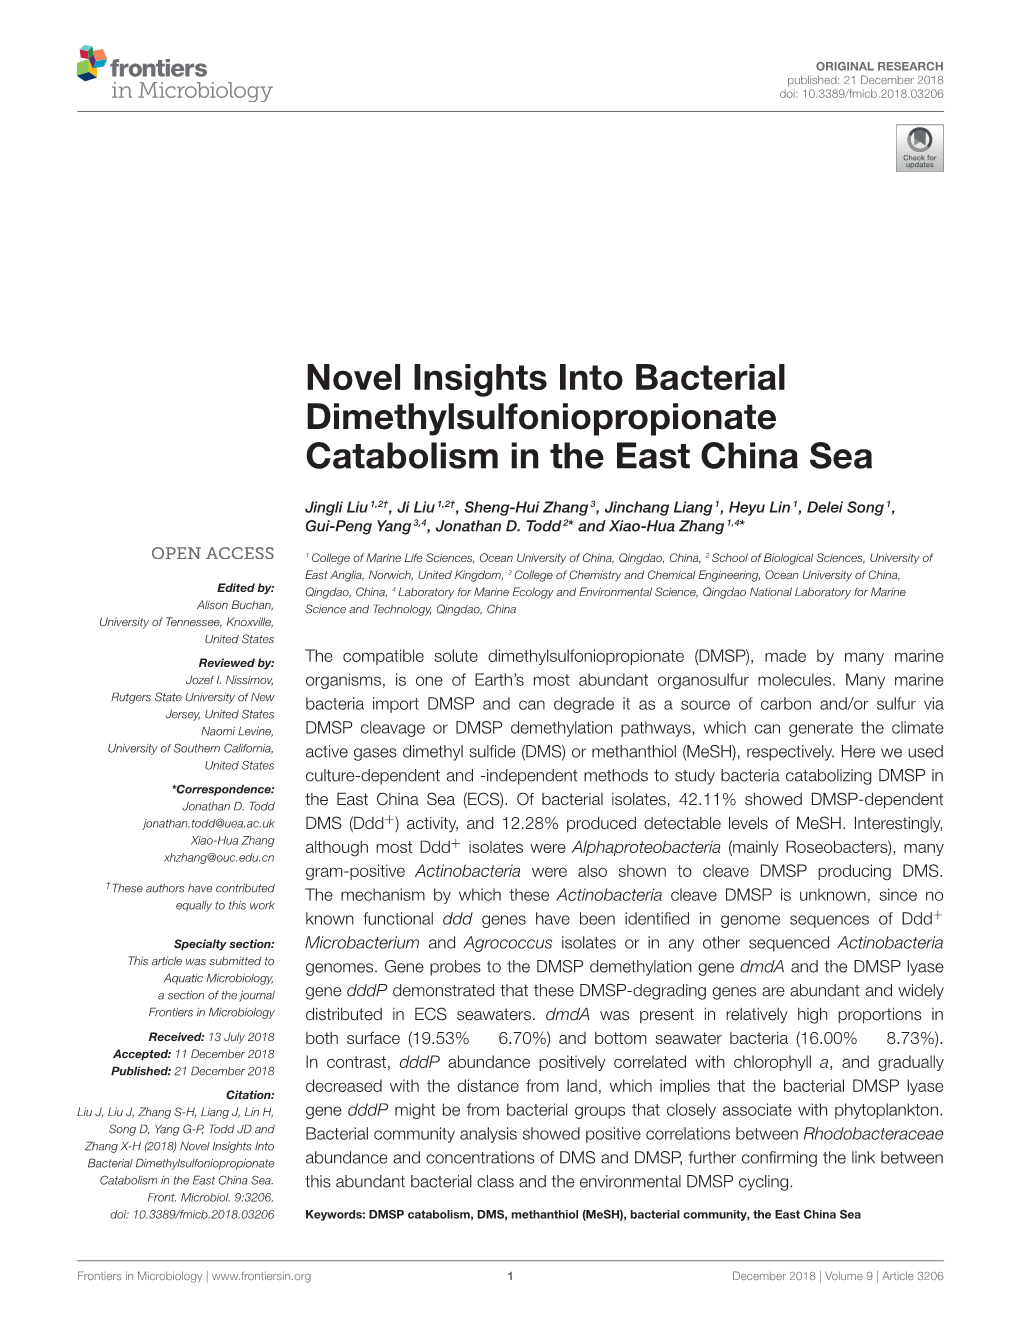 Novel Insights Into Bacterial Dimethylsulfoniopropionate Catabolism in the East China Sea